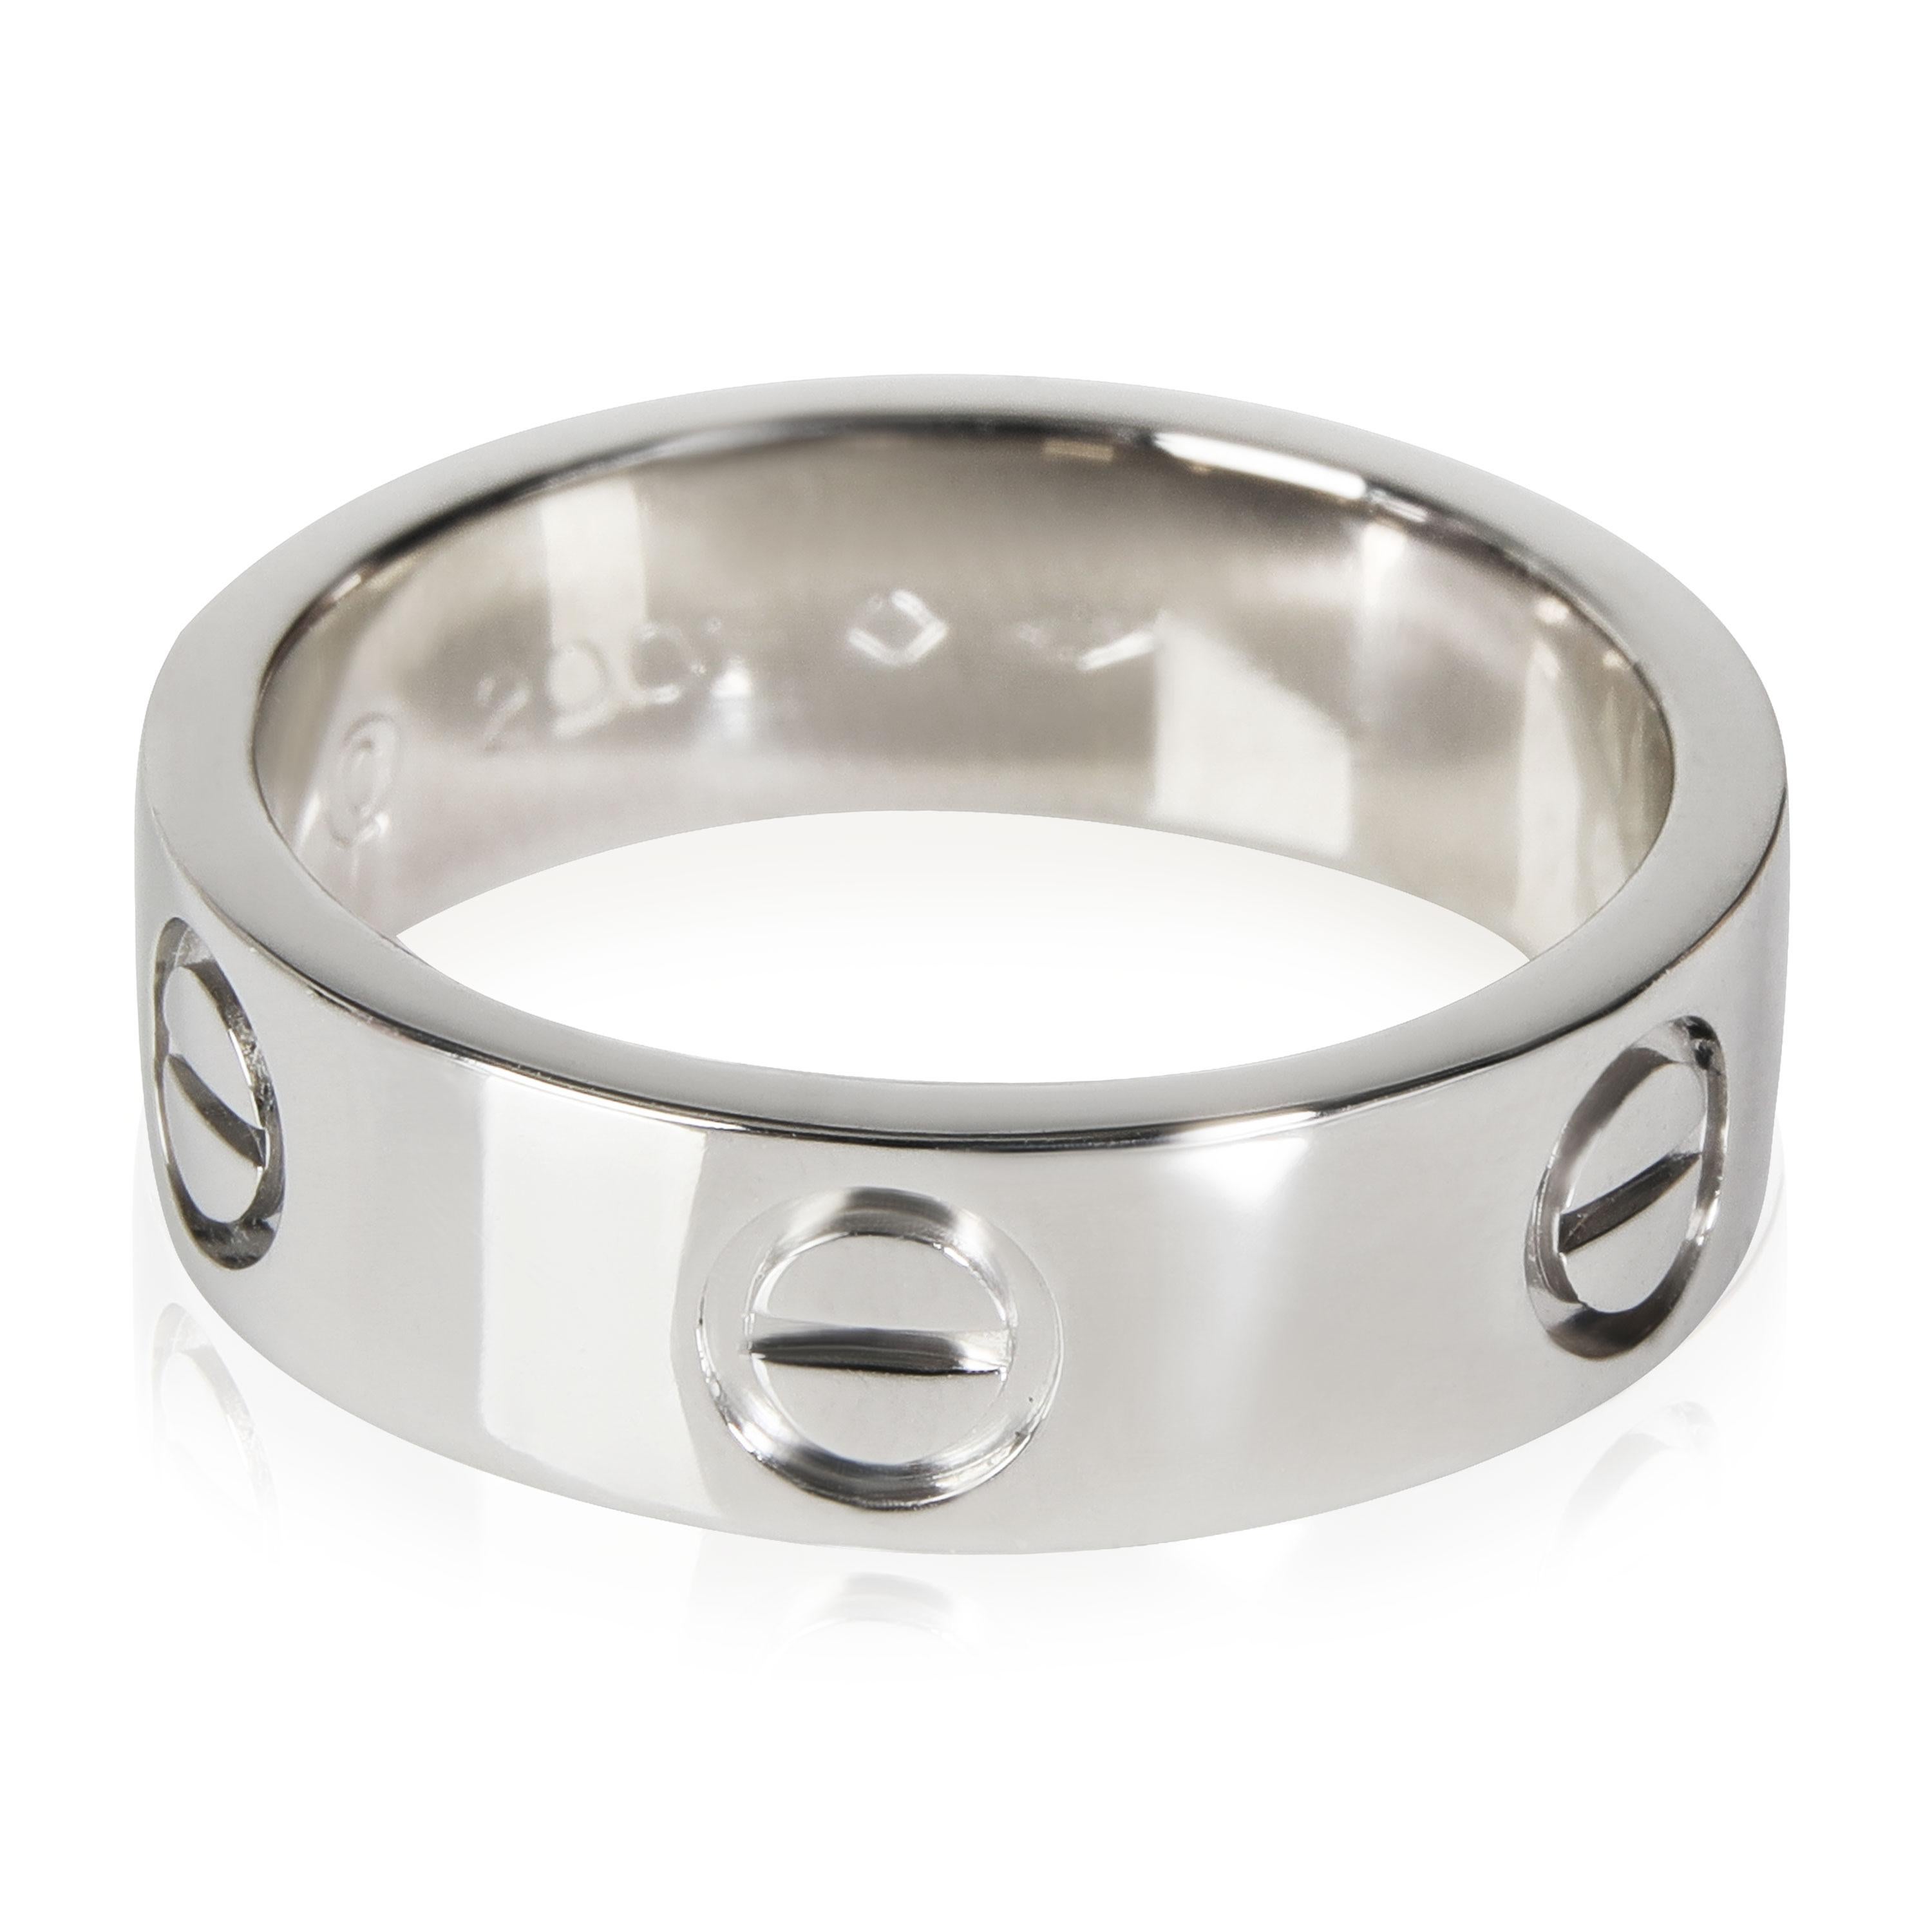 Cartier Love Ring in Platinum

PRIMARY DETAILS
SKU: 115402
Listing Title: Cartier Love Ring in Platinum
Condition Description: Retails for 4000 USD. In excellent condition and recently polished. Ring size is 5.25.
Brand: Cartier
Collection/Series: